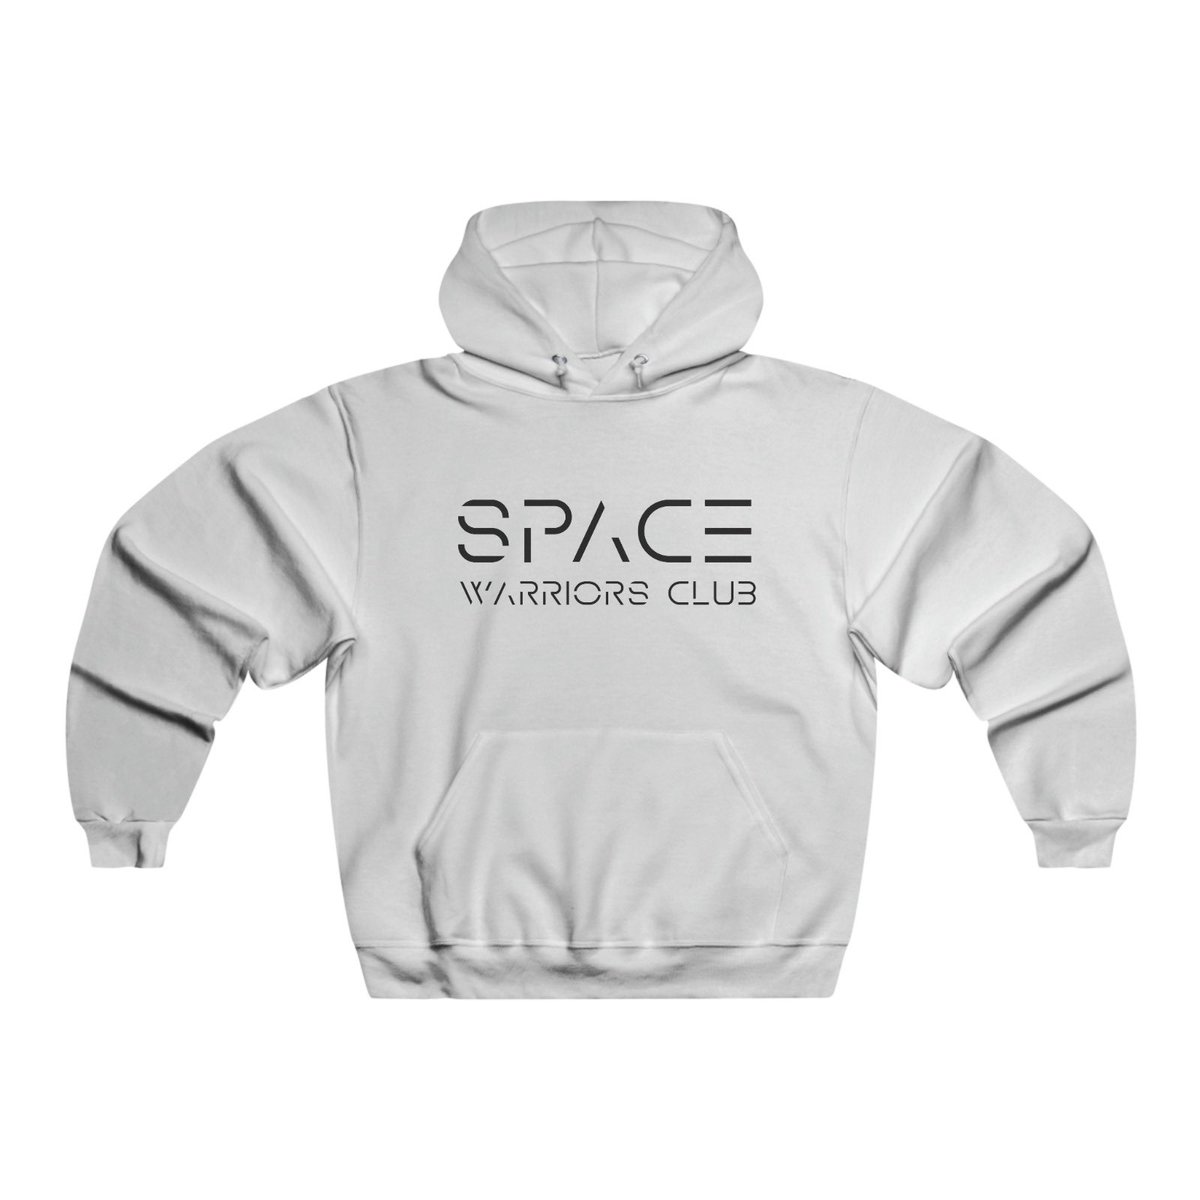 The Space Warriors Club merch website will be open soon ! Don’t forget to participate to our Designer Contest and get a chance to have your design on one of our merch 👕 All info on our discord server: >> discord.gg/swc <<